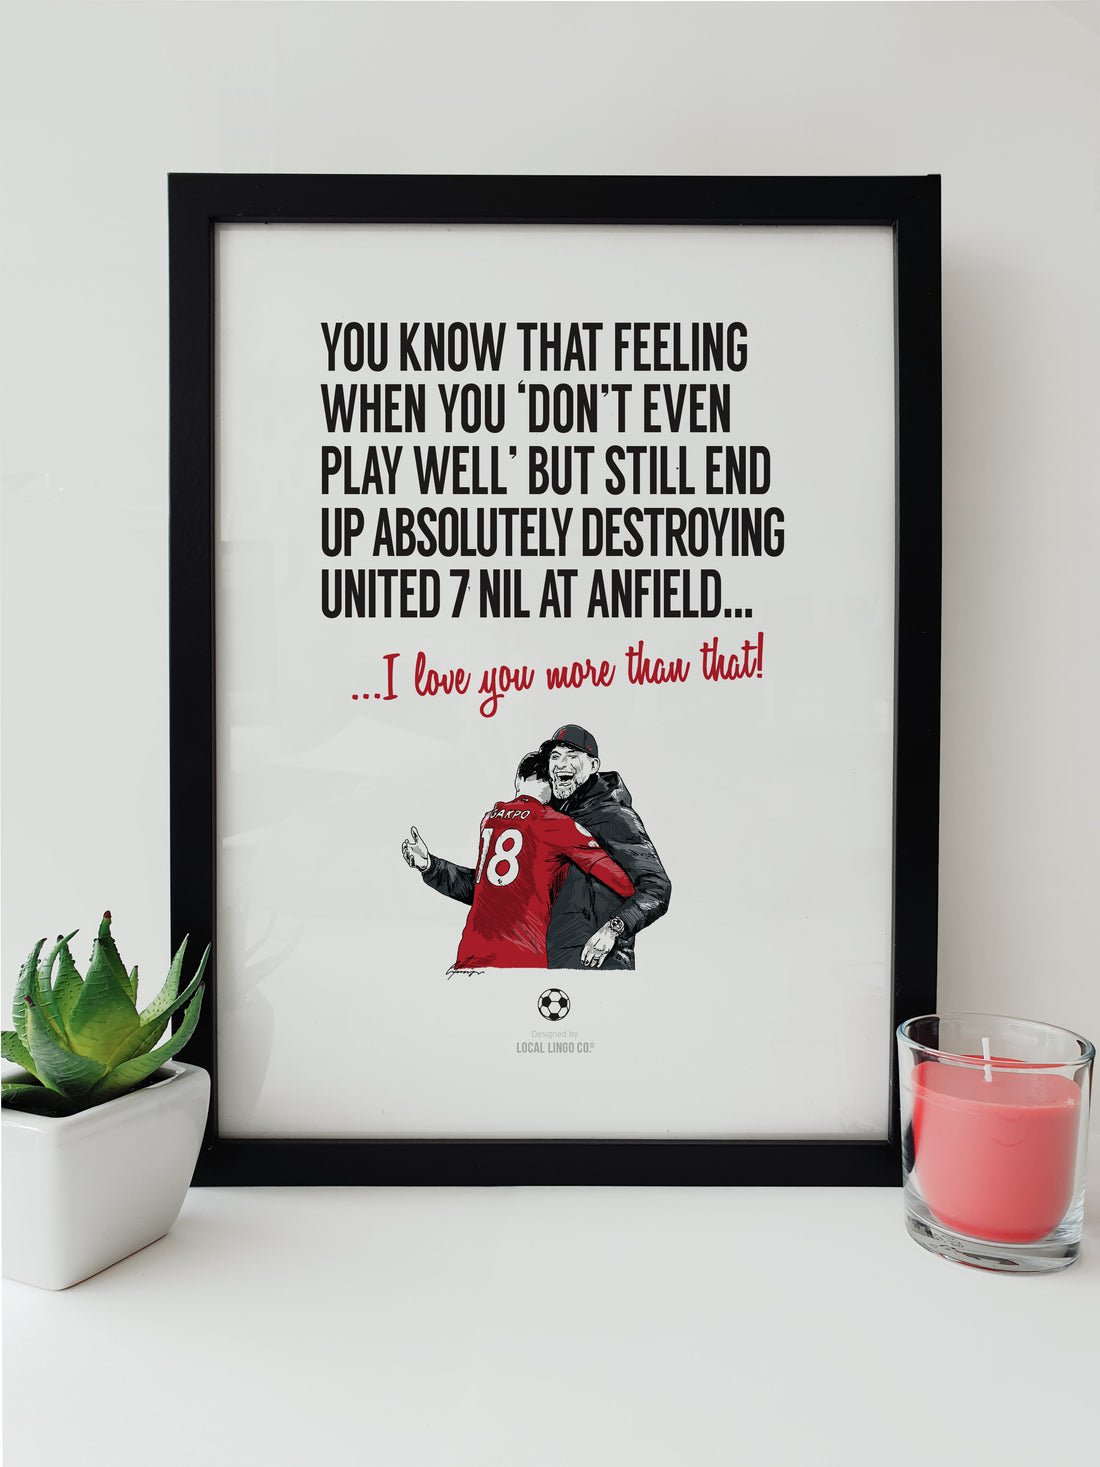 Local Lingo's Liverpool FC themed print with a hand-drawn illustration of Jurgen Klopp and Gakpo, celebrating a 7-nil victory at Anfield, available in A3 or A4 sizes.